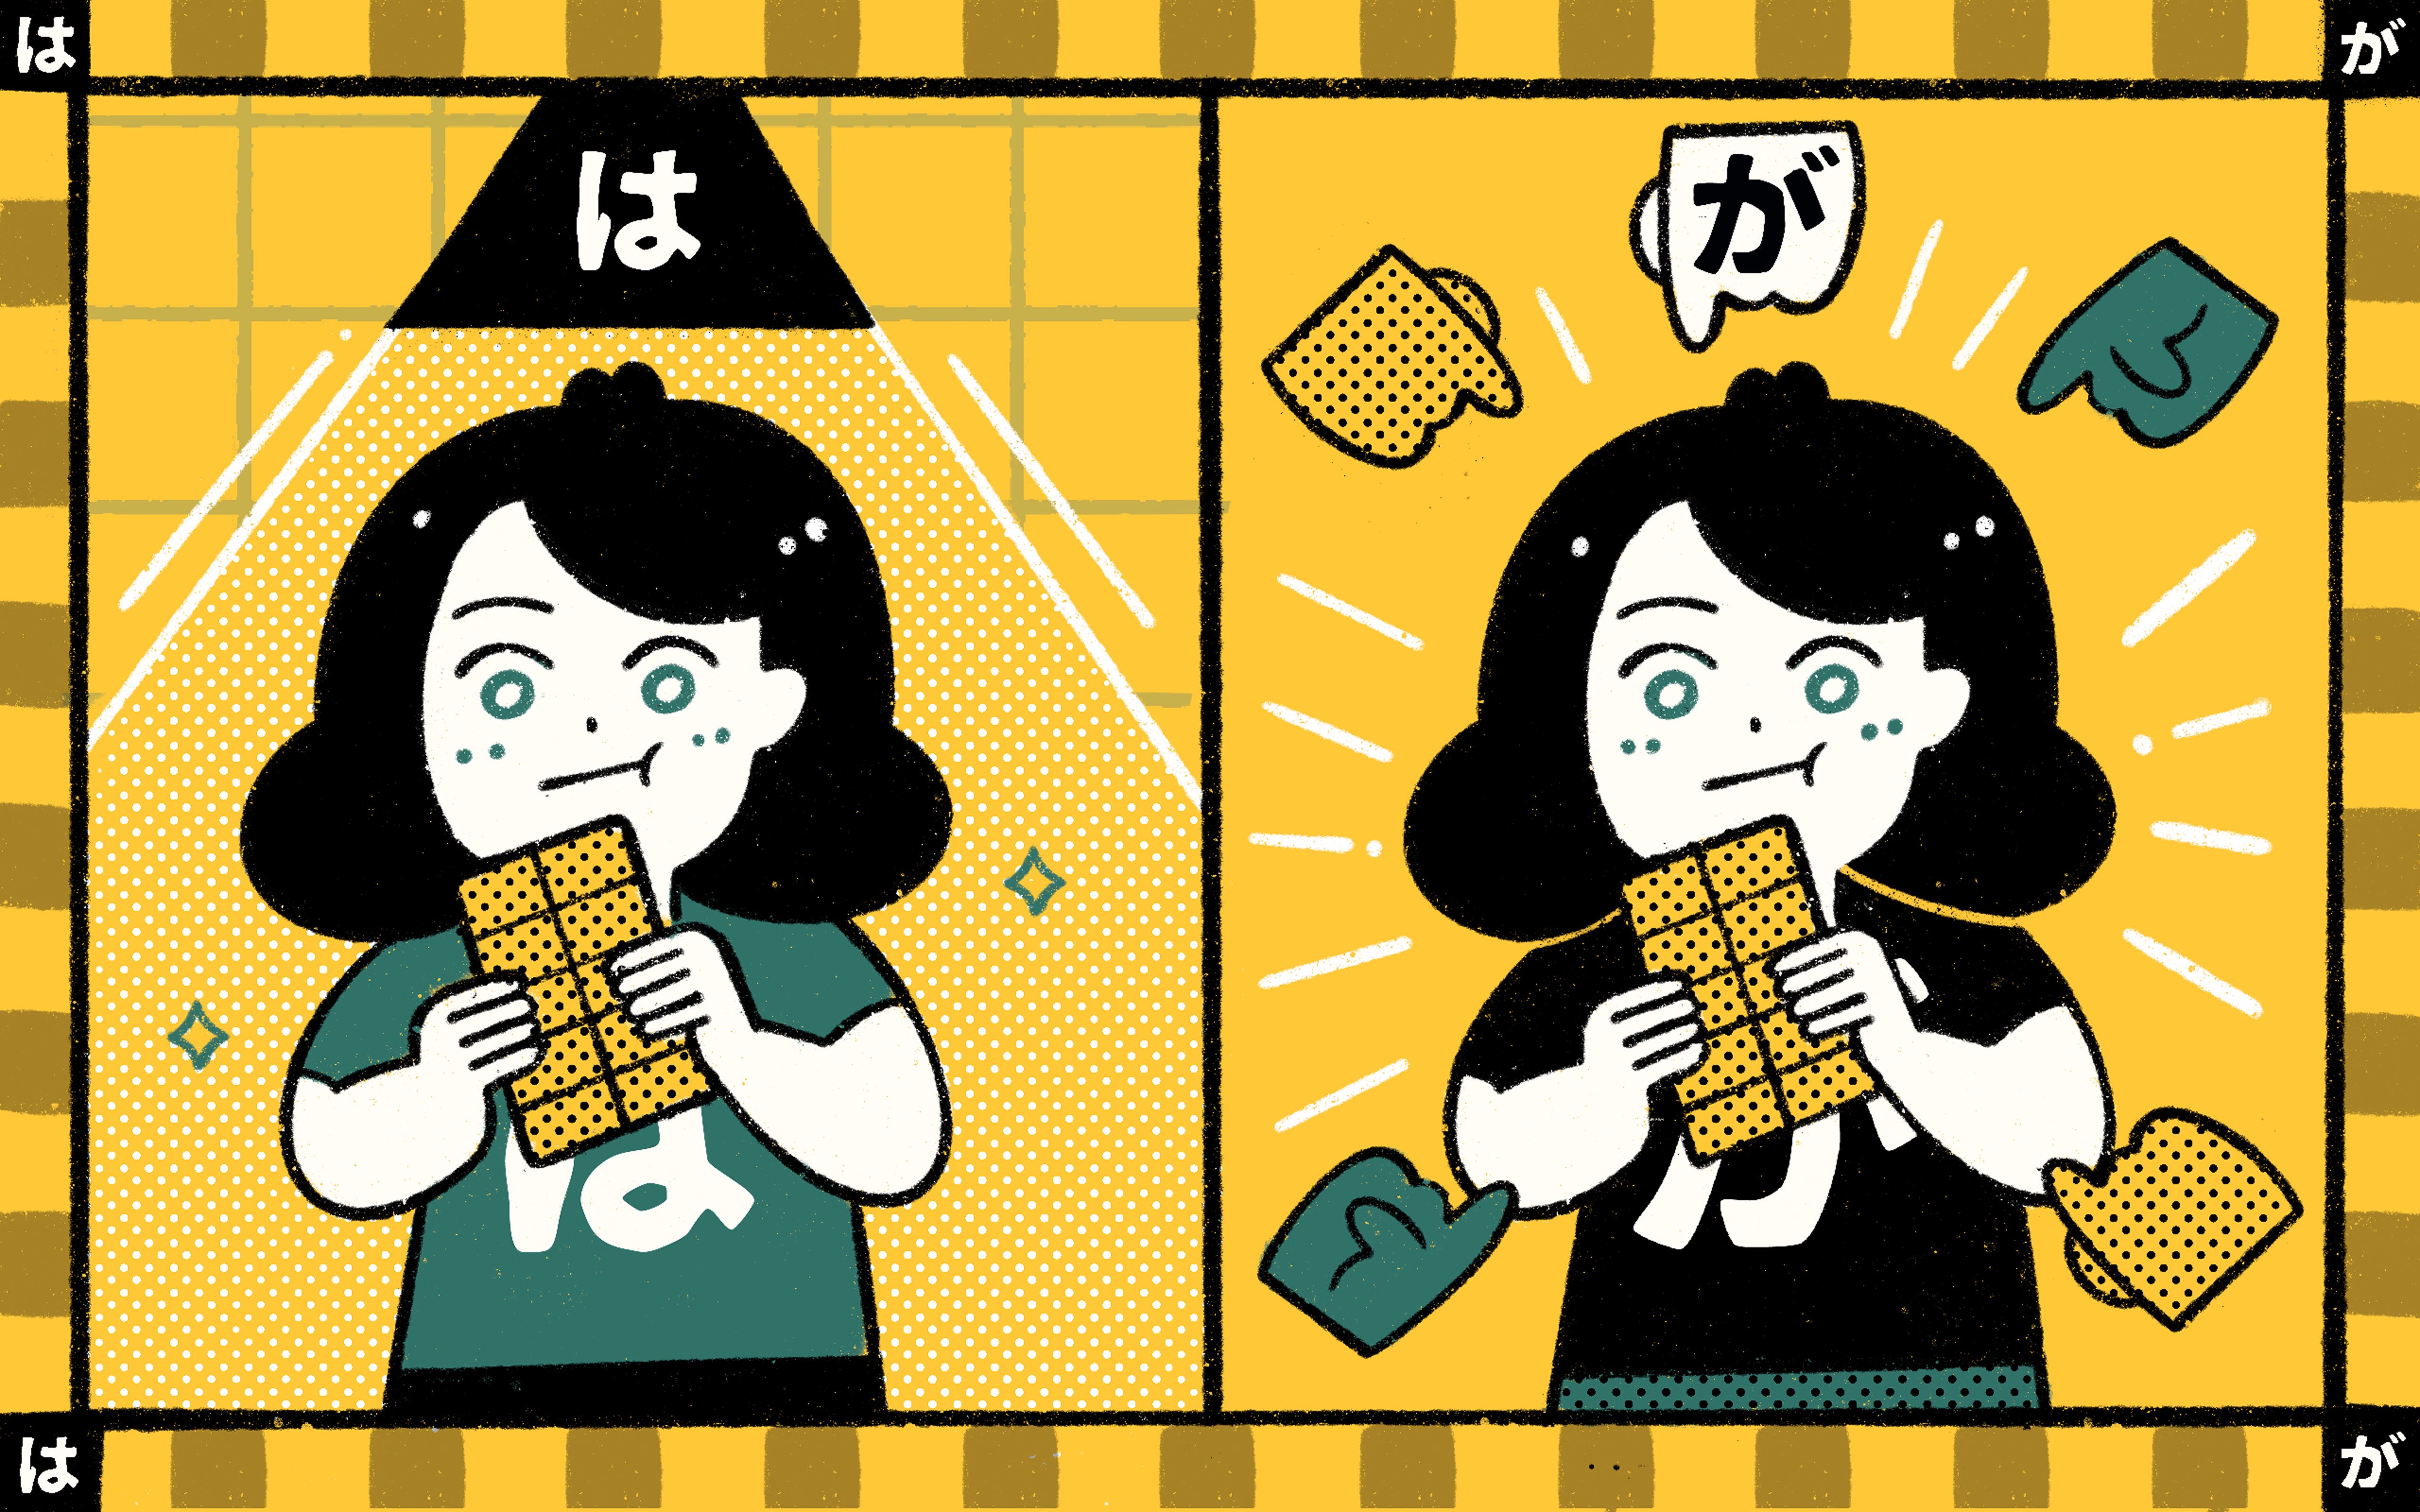 Ambiguous Japanese Expressions Difficult for Natives to Distinguish